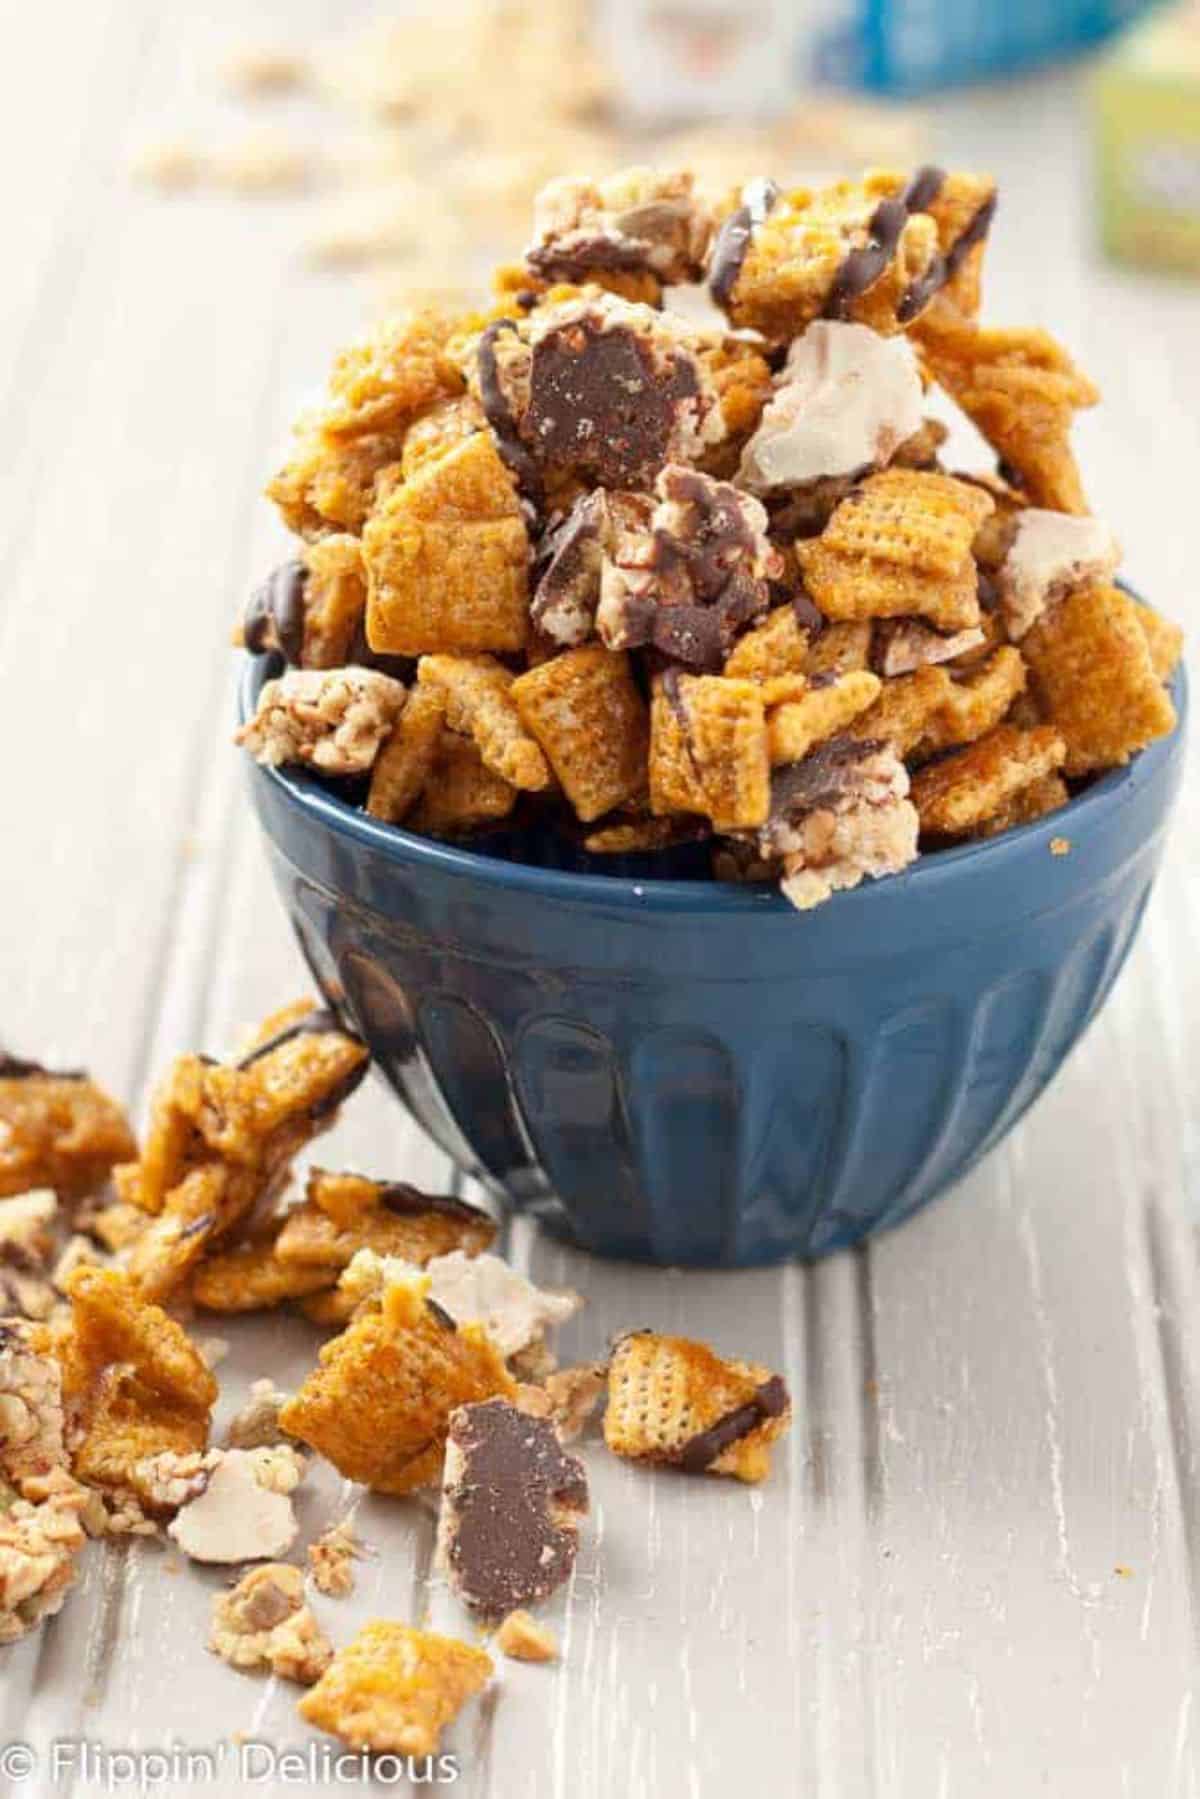 Crunchy Salted Caramel Chocolate Chex Mix in a blue bowl.